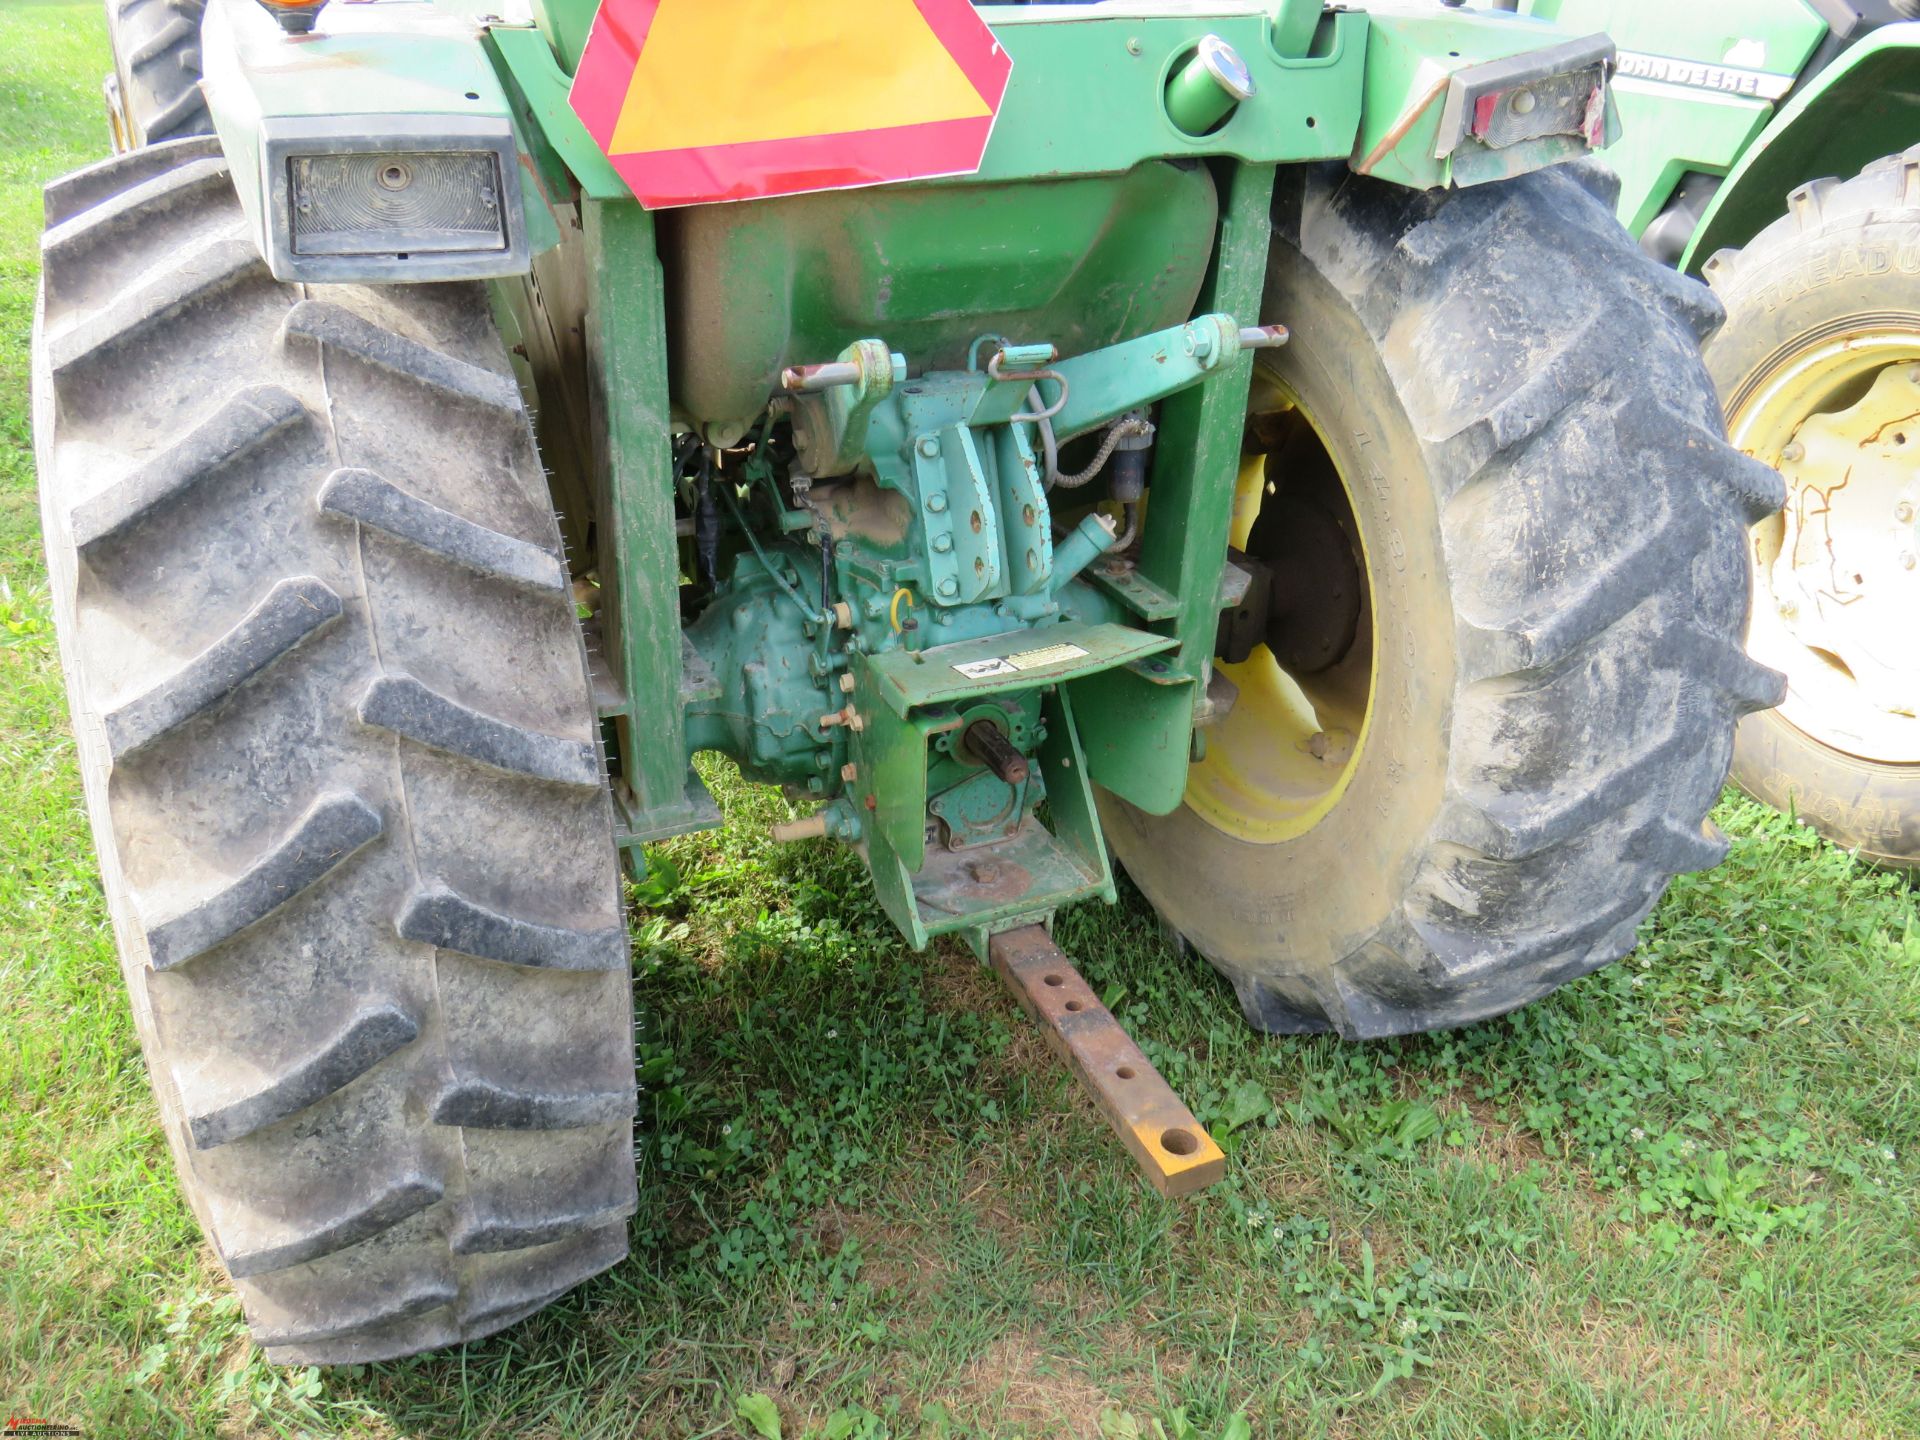 2001 JOHN DEERE 990 TRACTOR, PTO, NO 3PT ARMS, 14.9-24 TIRES, 5555 HOURS SHOWING (HOURS SUBJECT TO - Image 5 of 8